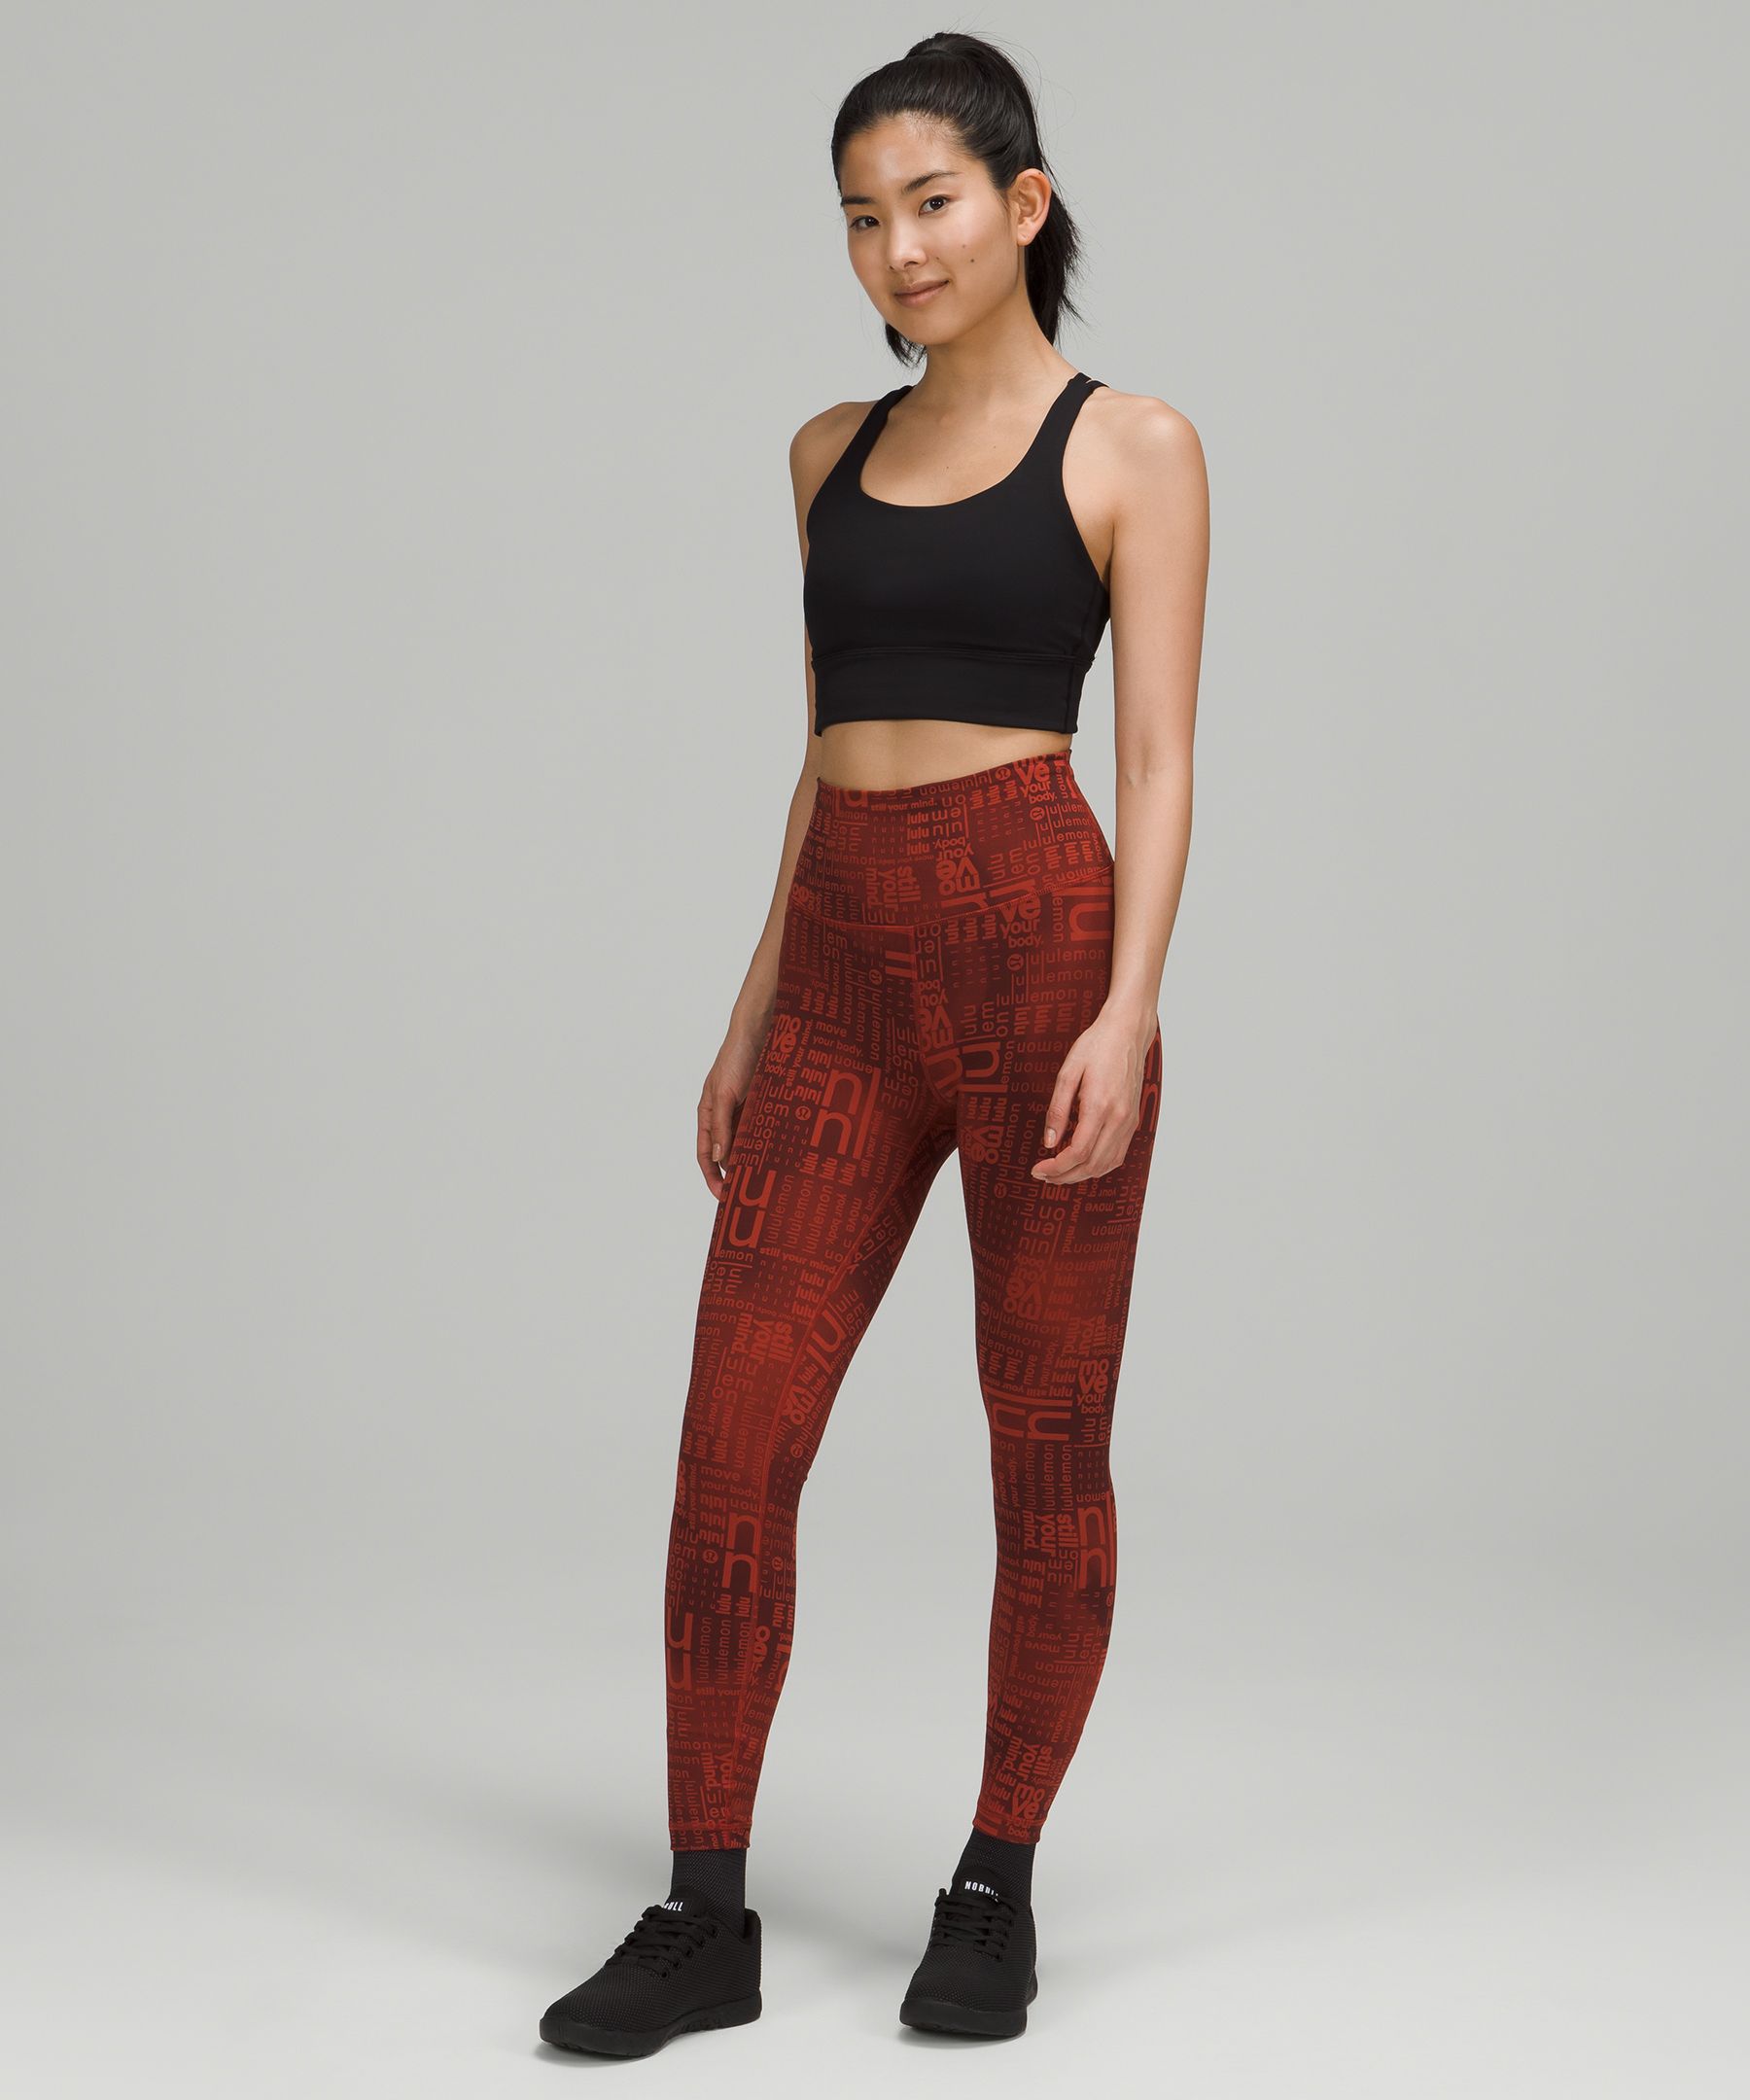 Lululemon and Lorna Jane have transformed the popular activewear industry